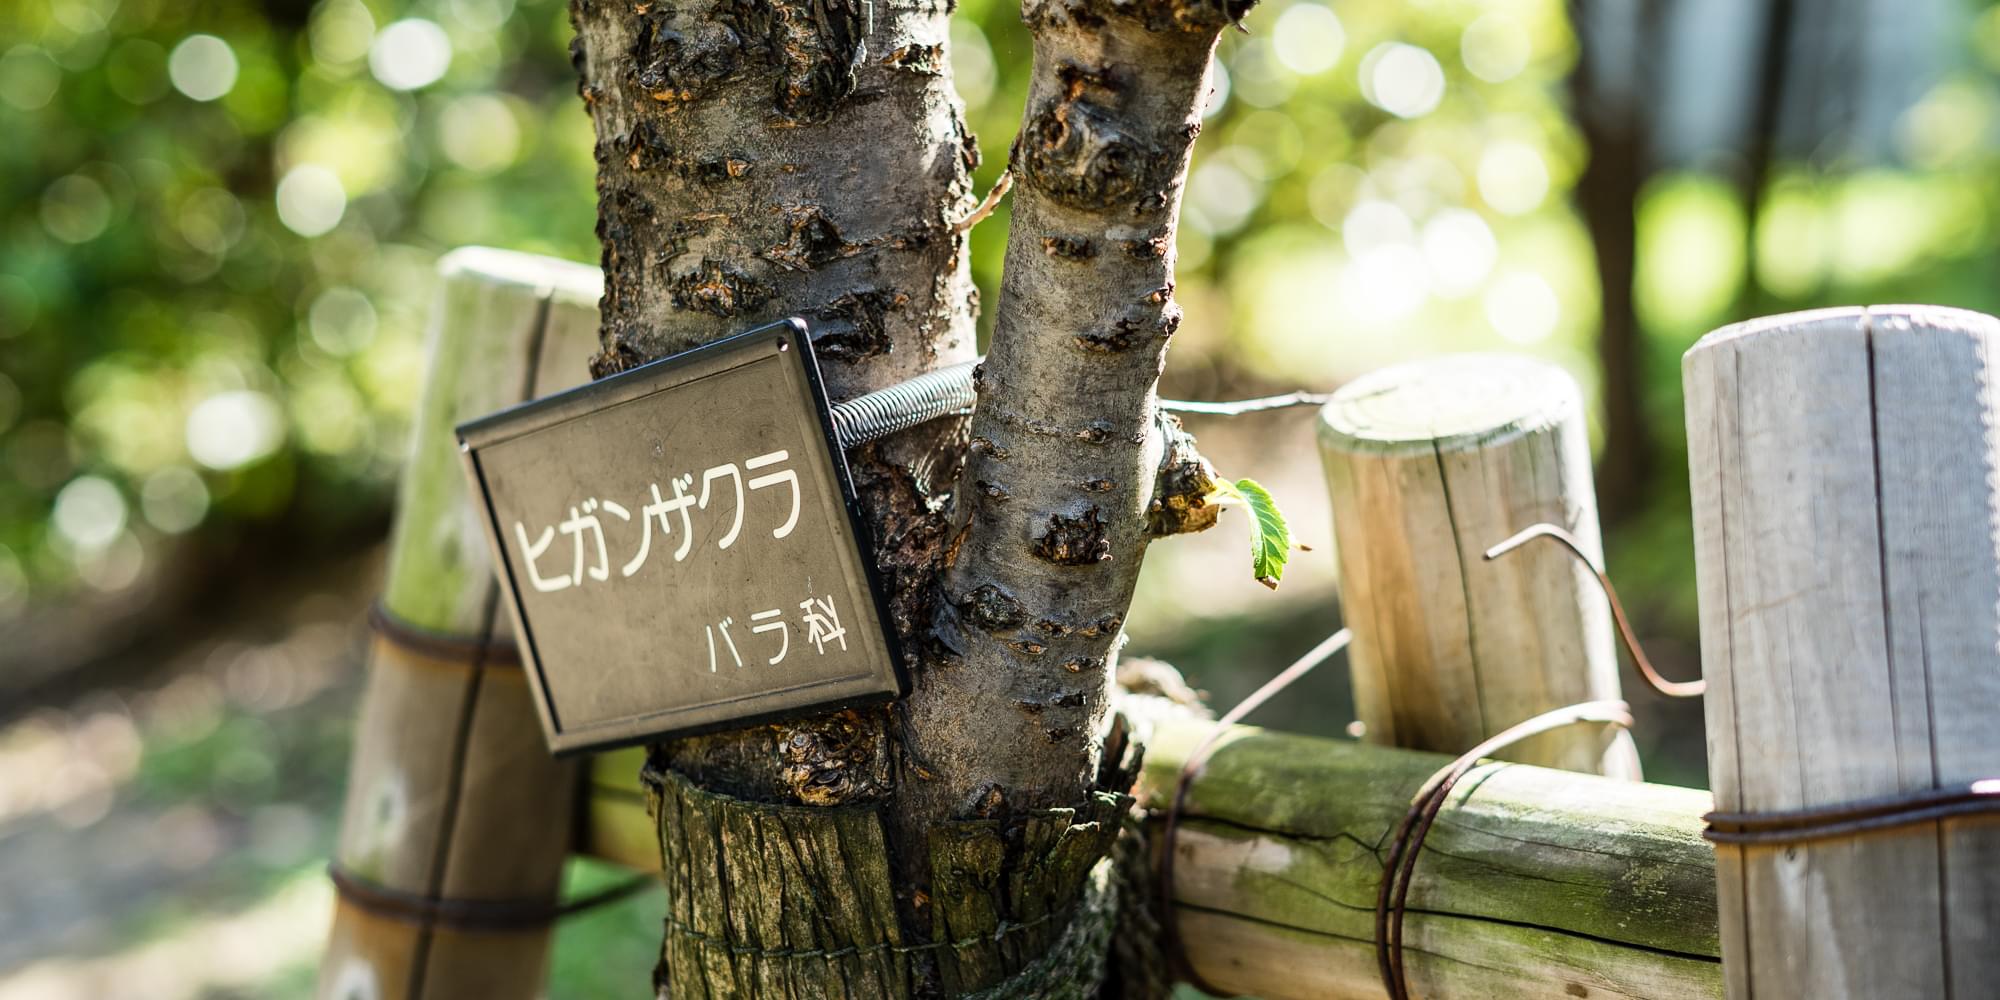 A close up of a sign mounted to a tree with the text Japanese text 'ヒガンザクラ バラ科', which translates to 'Prunus itosakura', presumably the genus of the tree. Only a small section above and blow the sign can be seen of the tree trunk. Wooden supports are attached to the tree. The background has some out of focus blurry elements known as bokeh balls.